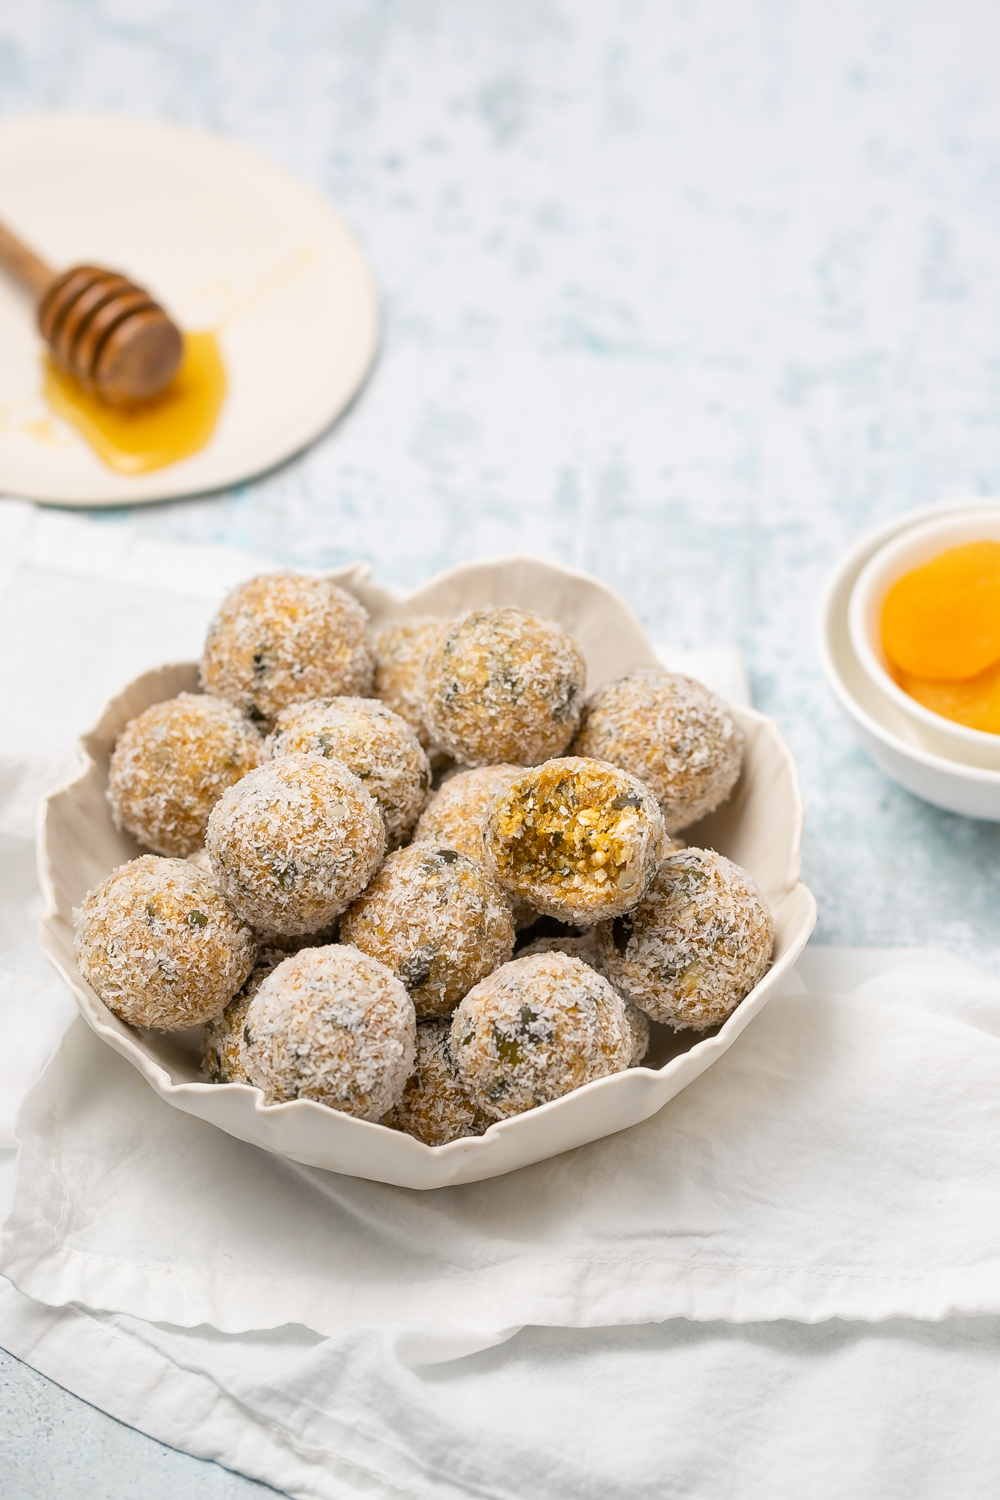 small white scalloped bowl filled with apricot bliss balls, white napkin and honey to side